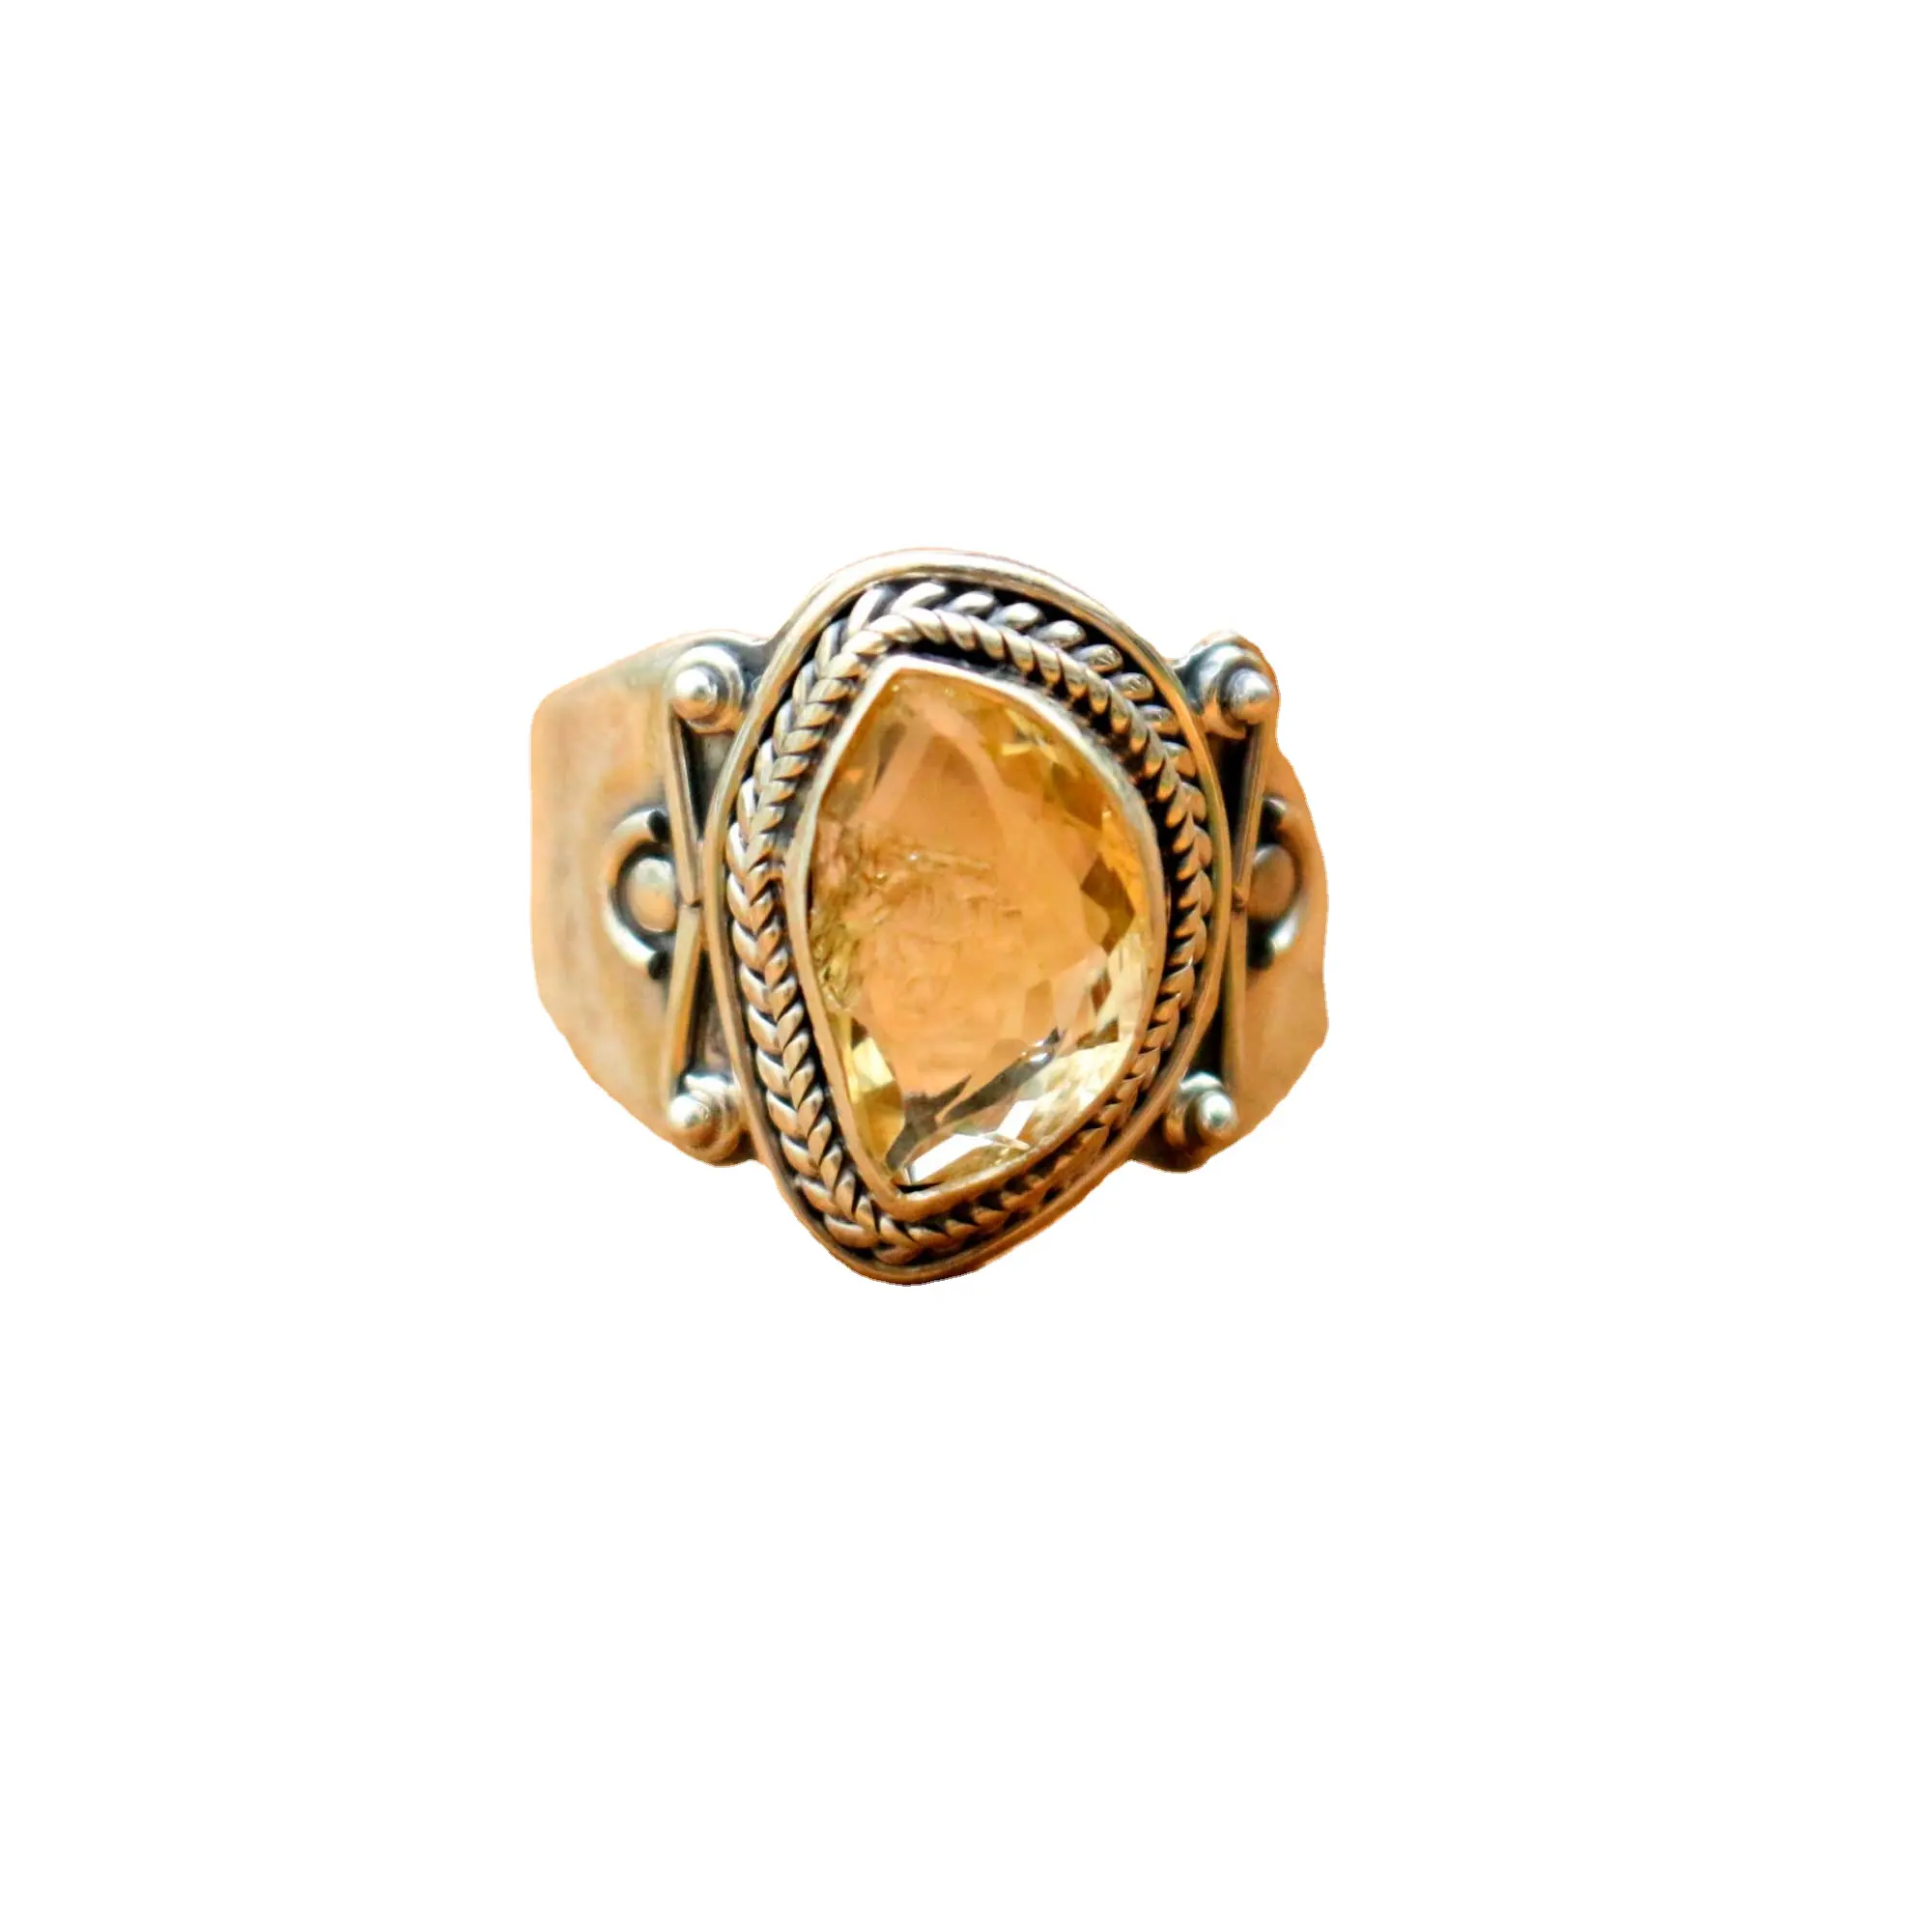 Unique Quality Natural Citrine 925 Sterling Silver Gemstone Handmade Silver Ring jewelry Wholesale Factory Price